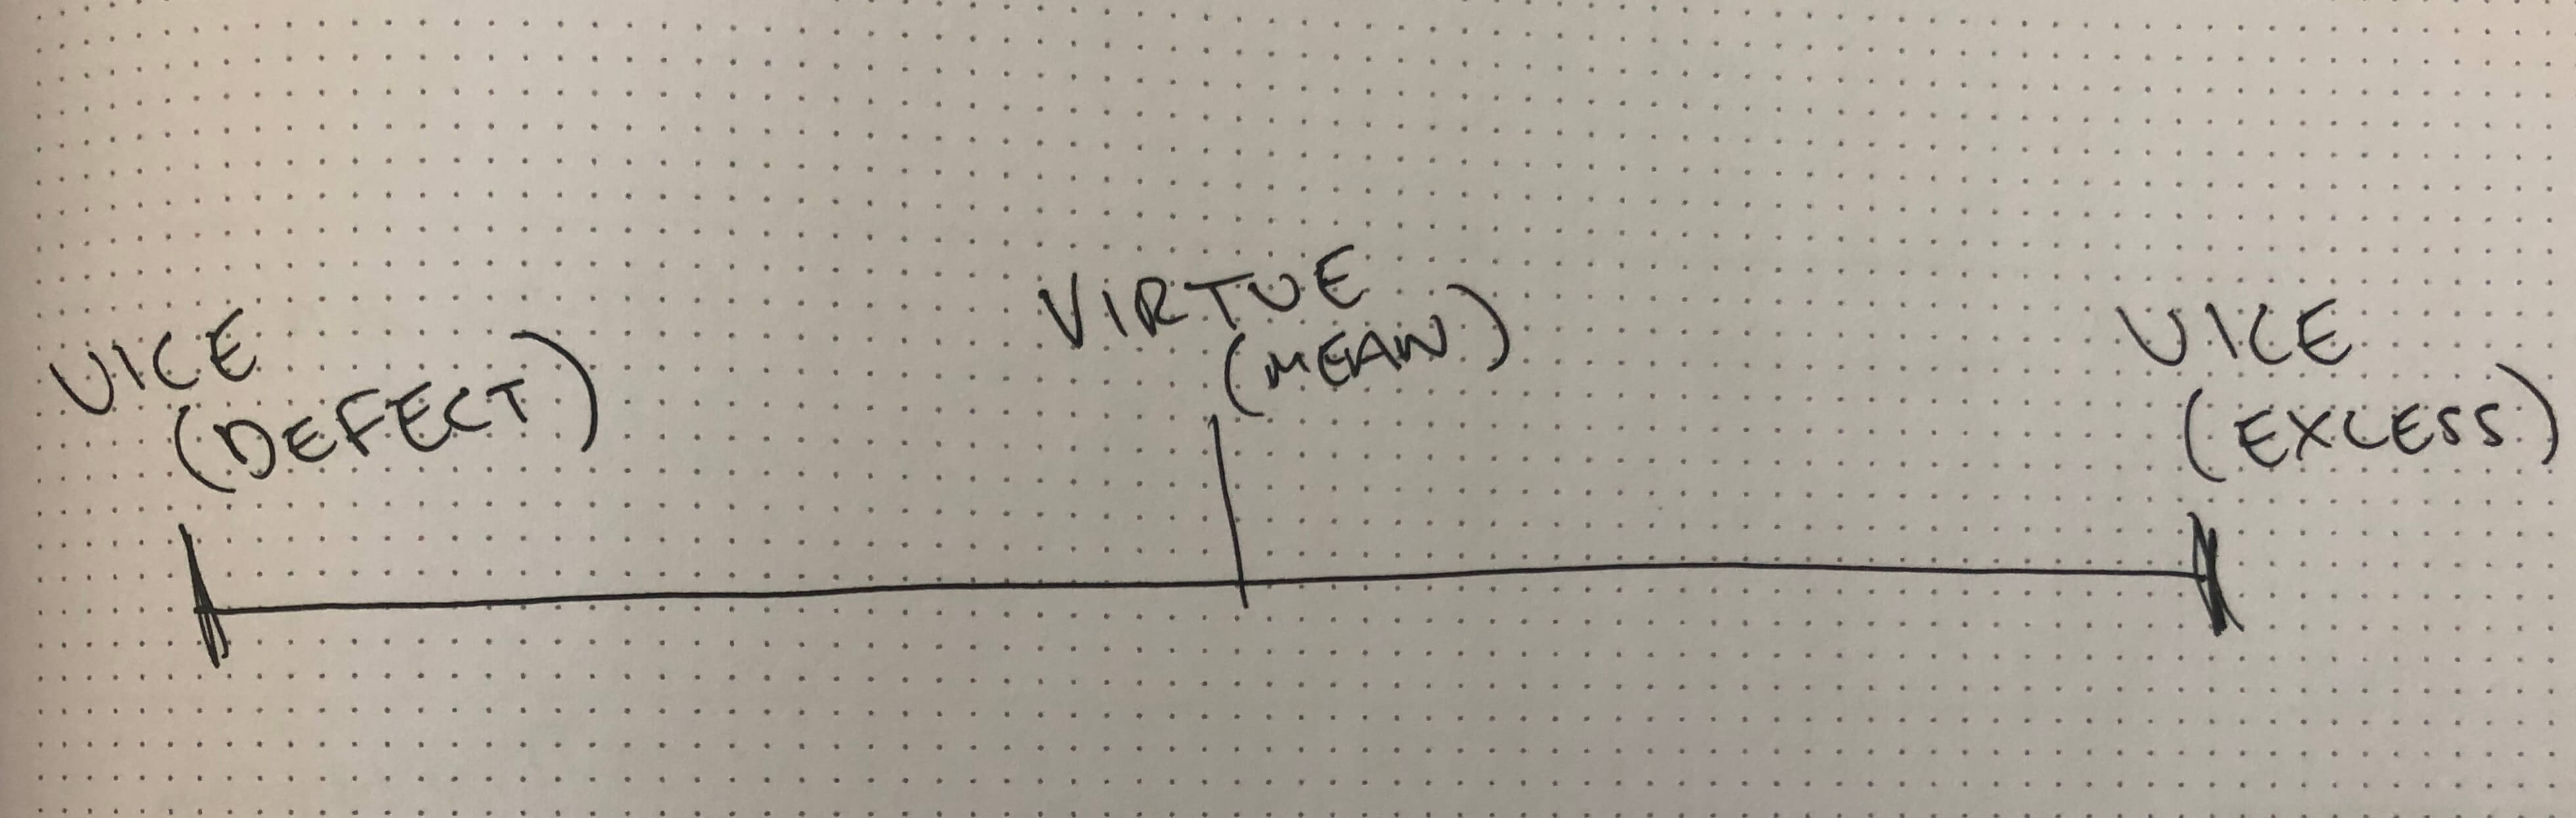 guide to aristotle's virtues